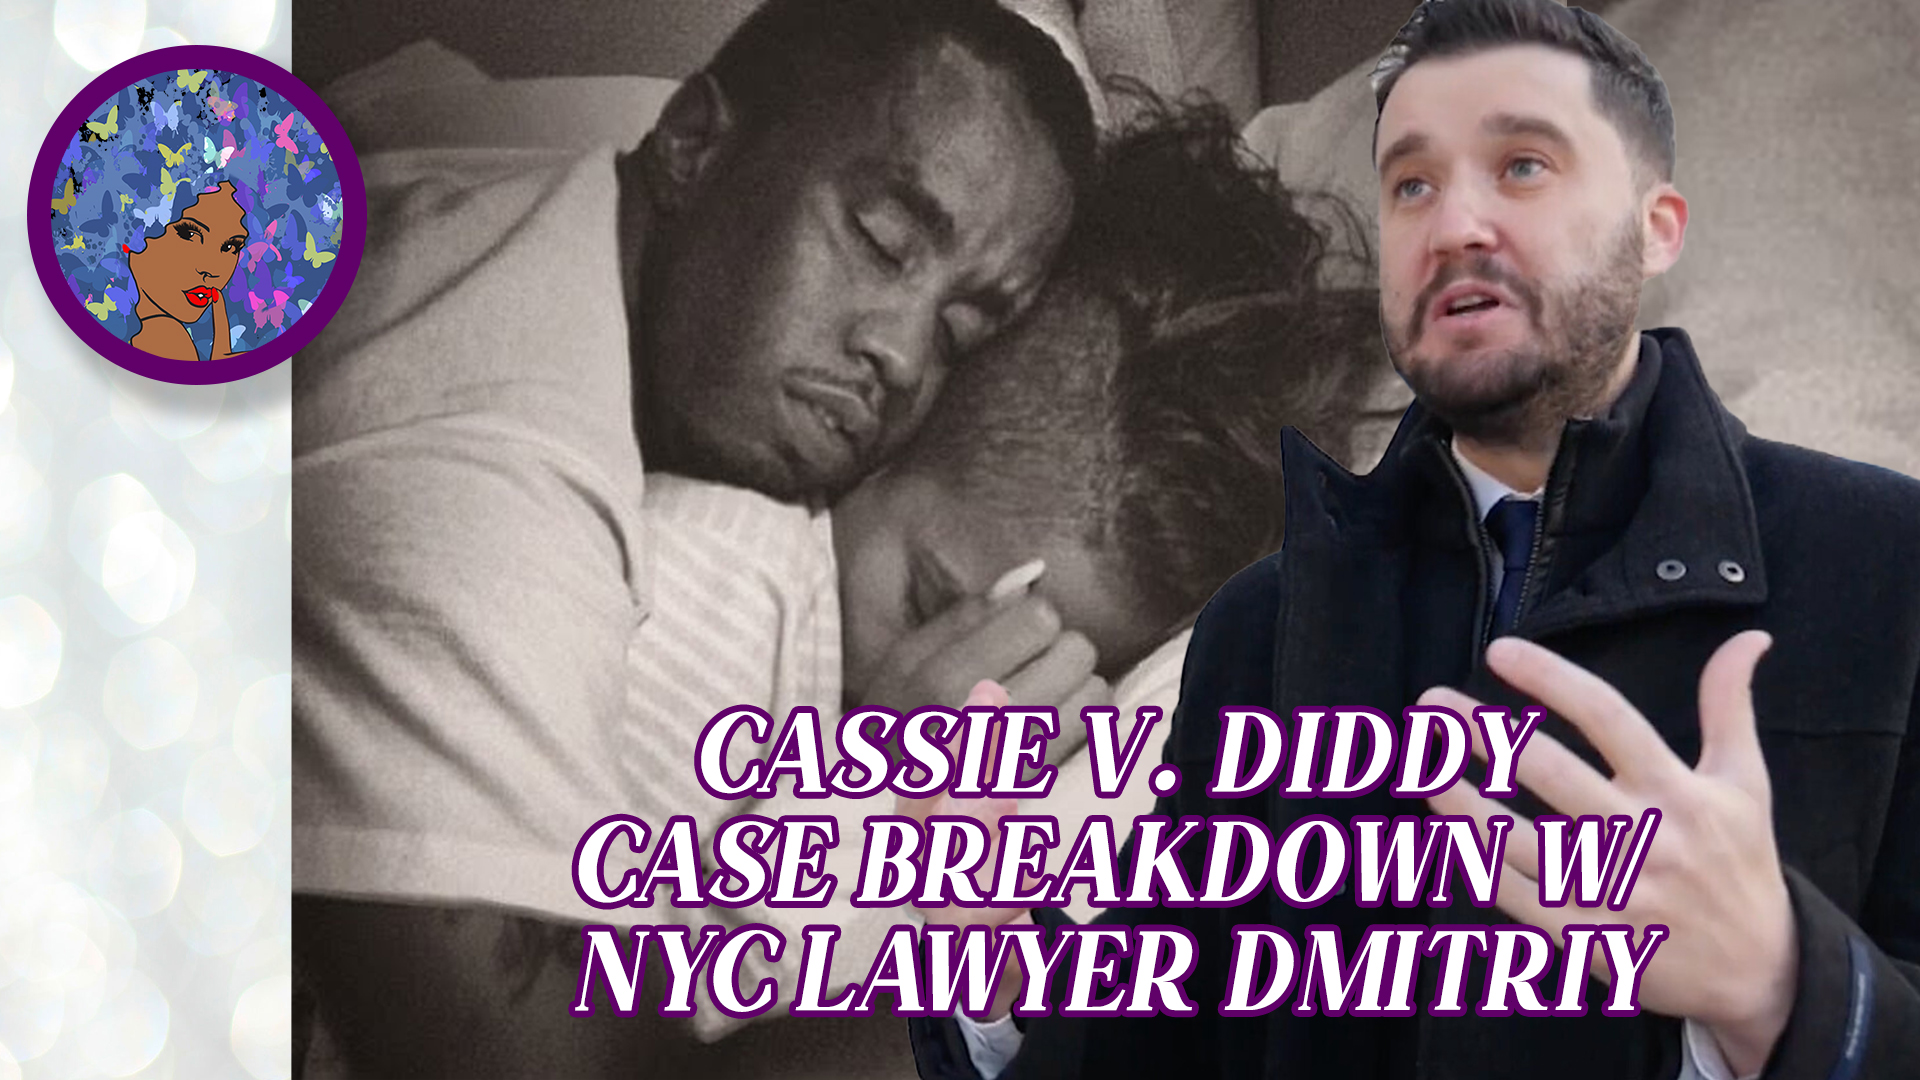 11.18.23 - Cassie V. Diddy Case Breakdown With NYC Lawyer Dmitriy Thumbnail